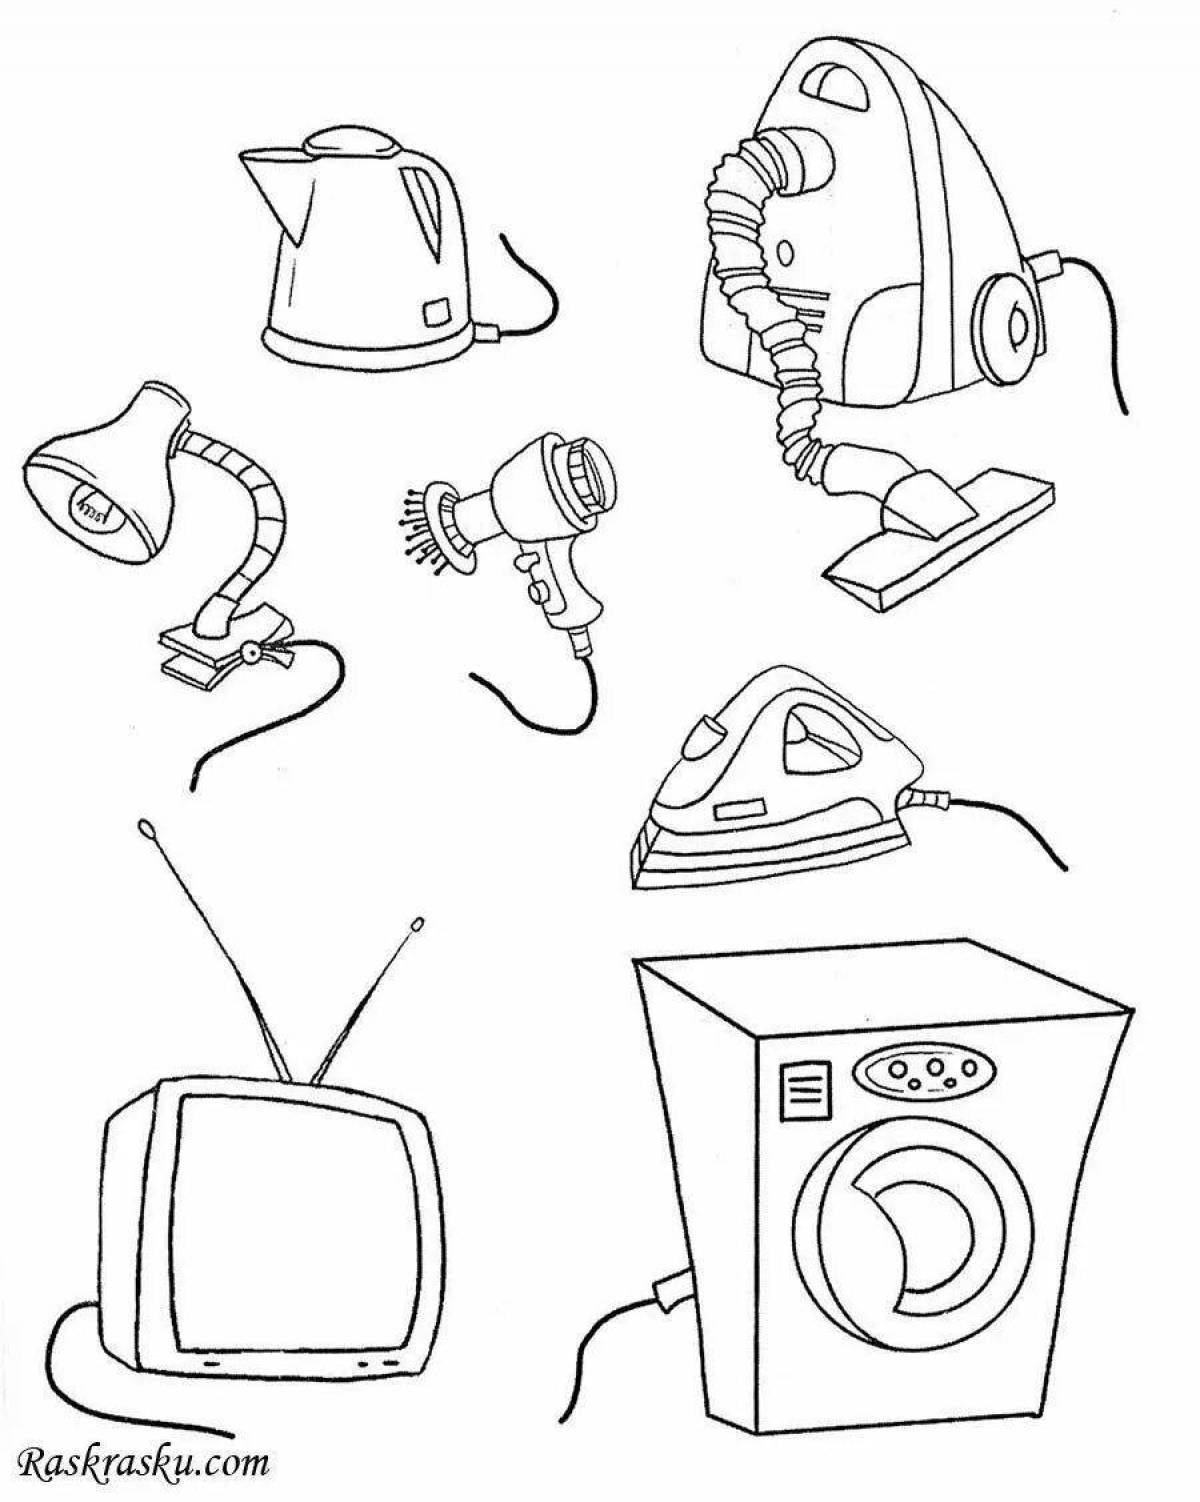 Bright household appliances coloring book for teens